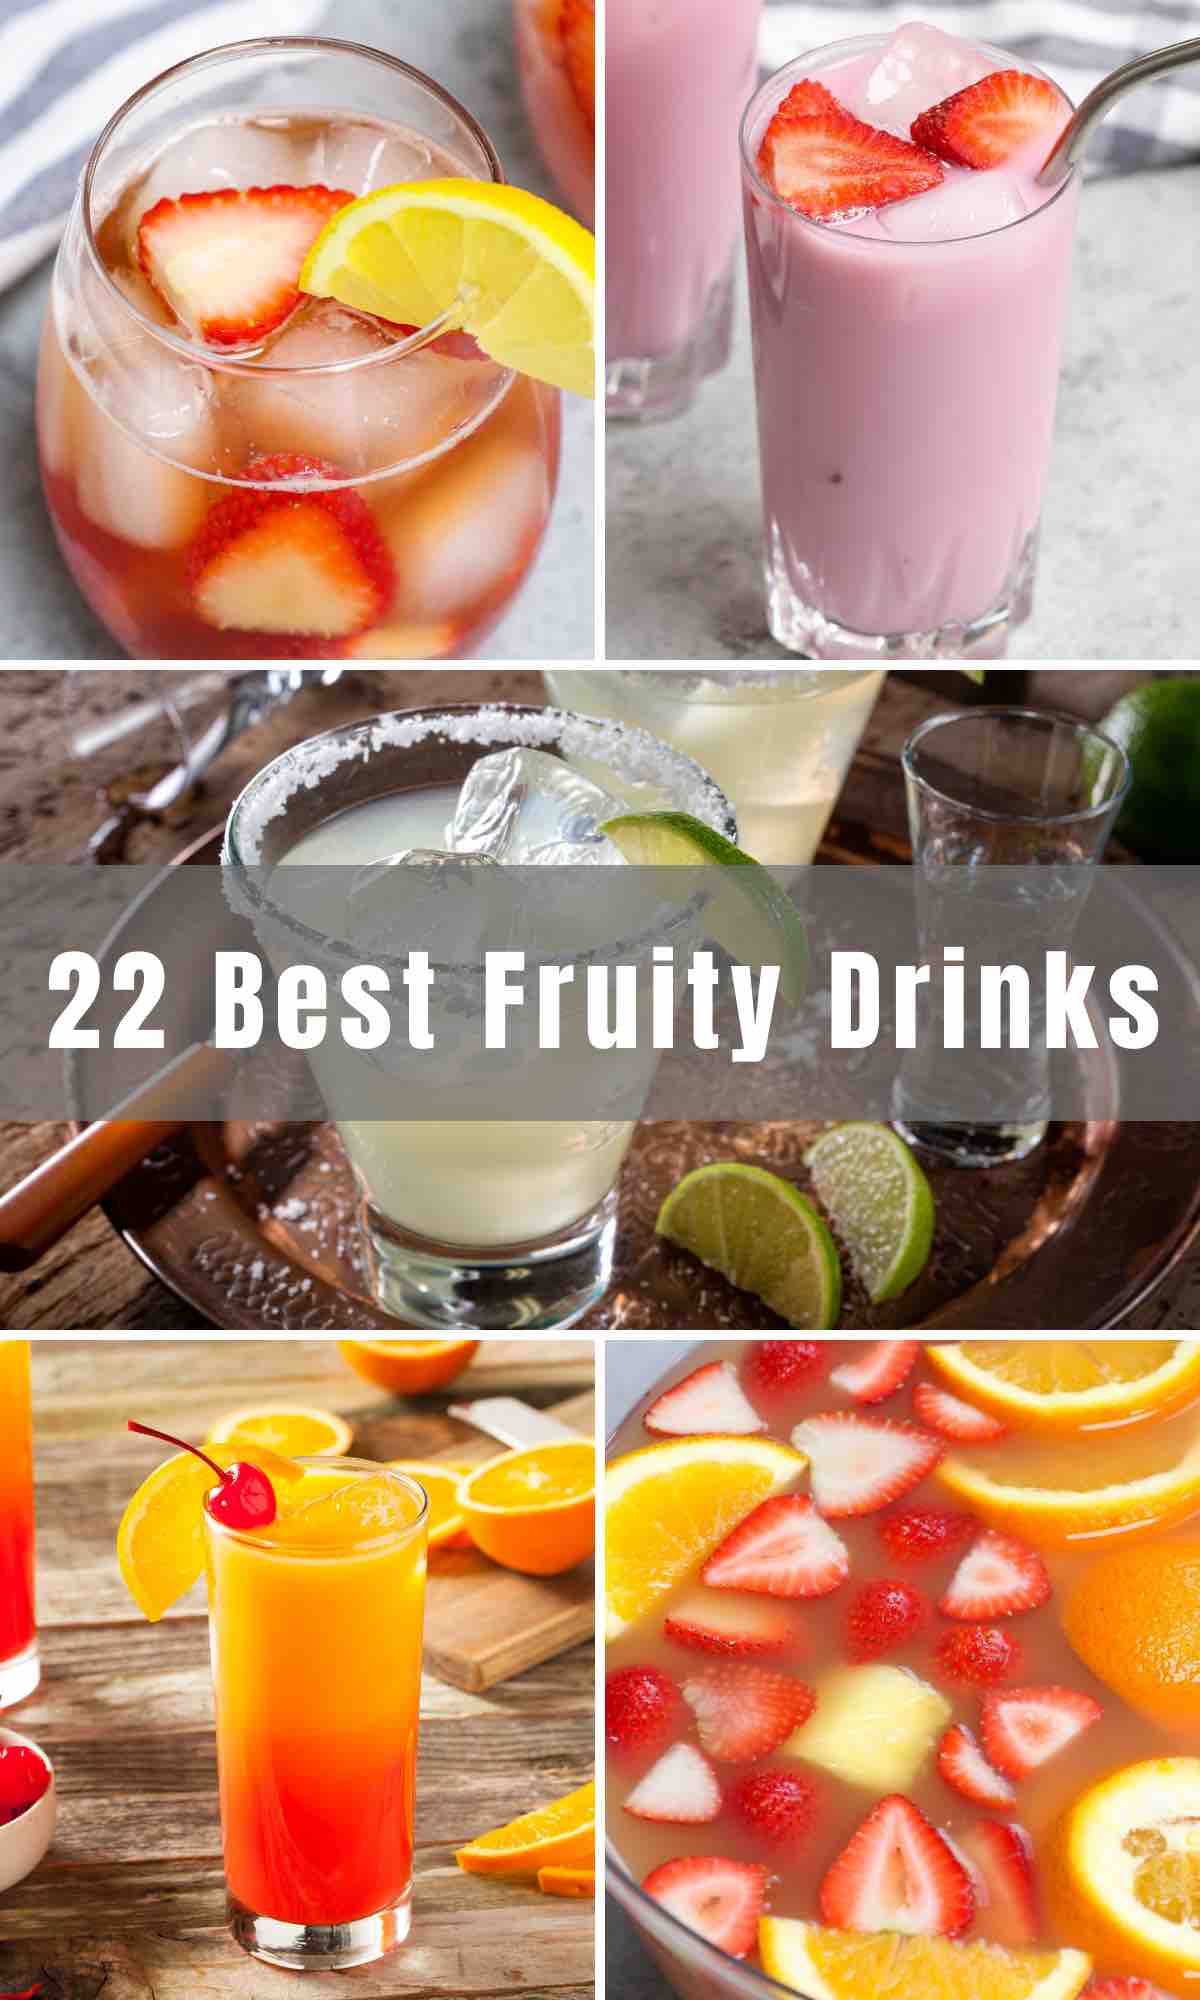 A sweet and refreshing fruity drink can always boost your mood! We’ve collected 22 of the Best Fruity Drinks, from classic alcoholic cocktails like mimosas and vodka cranberry to non-alcoholic mocktails, here’s a roundup of the tastiest, fruitiest mixed drinks.